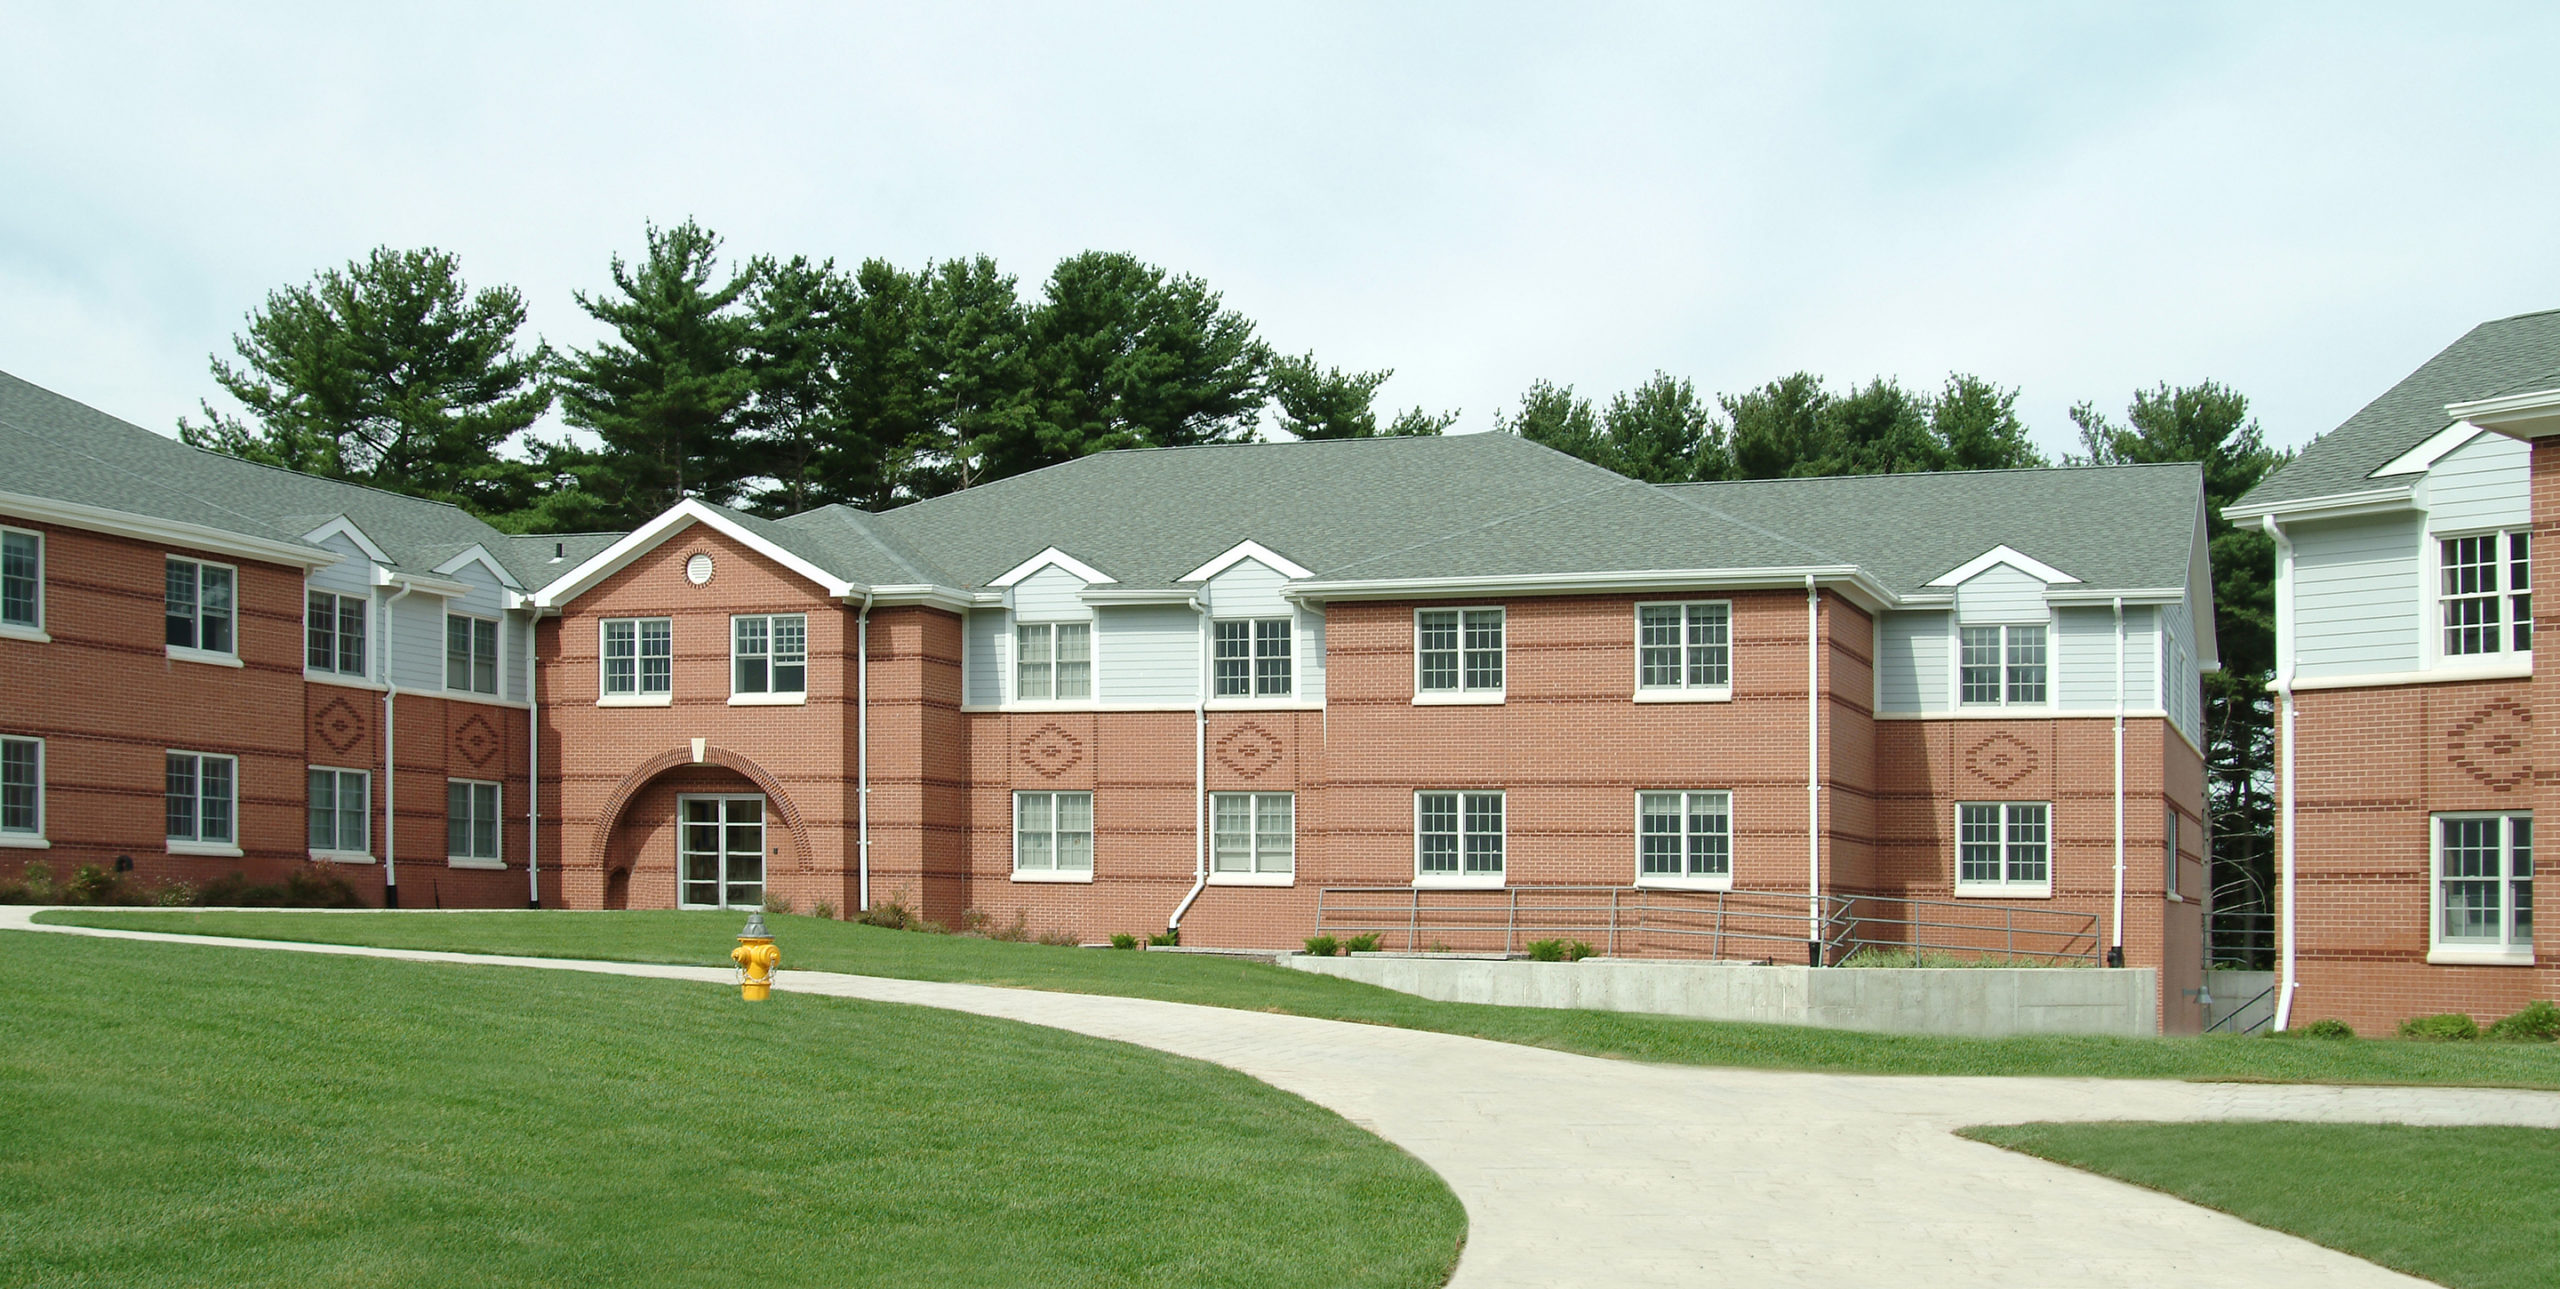 Five Towns College Dormitories in Five Towns College Dormitories in Dix Hills, NYHills, NY